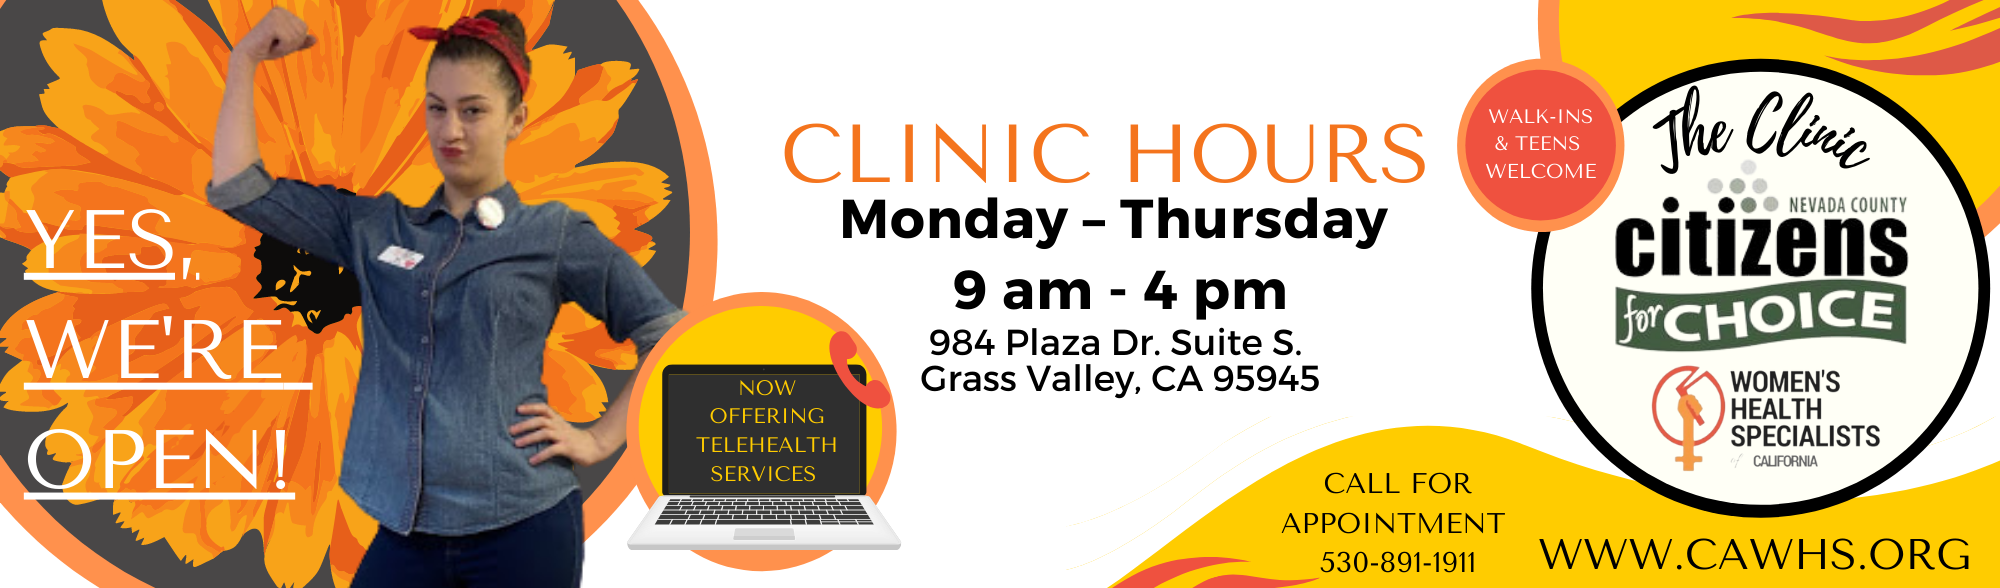 Grass Valley New Hours Poster (8 x 11 in) (Facebook Cover) (3)